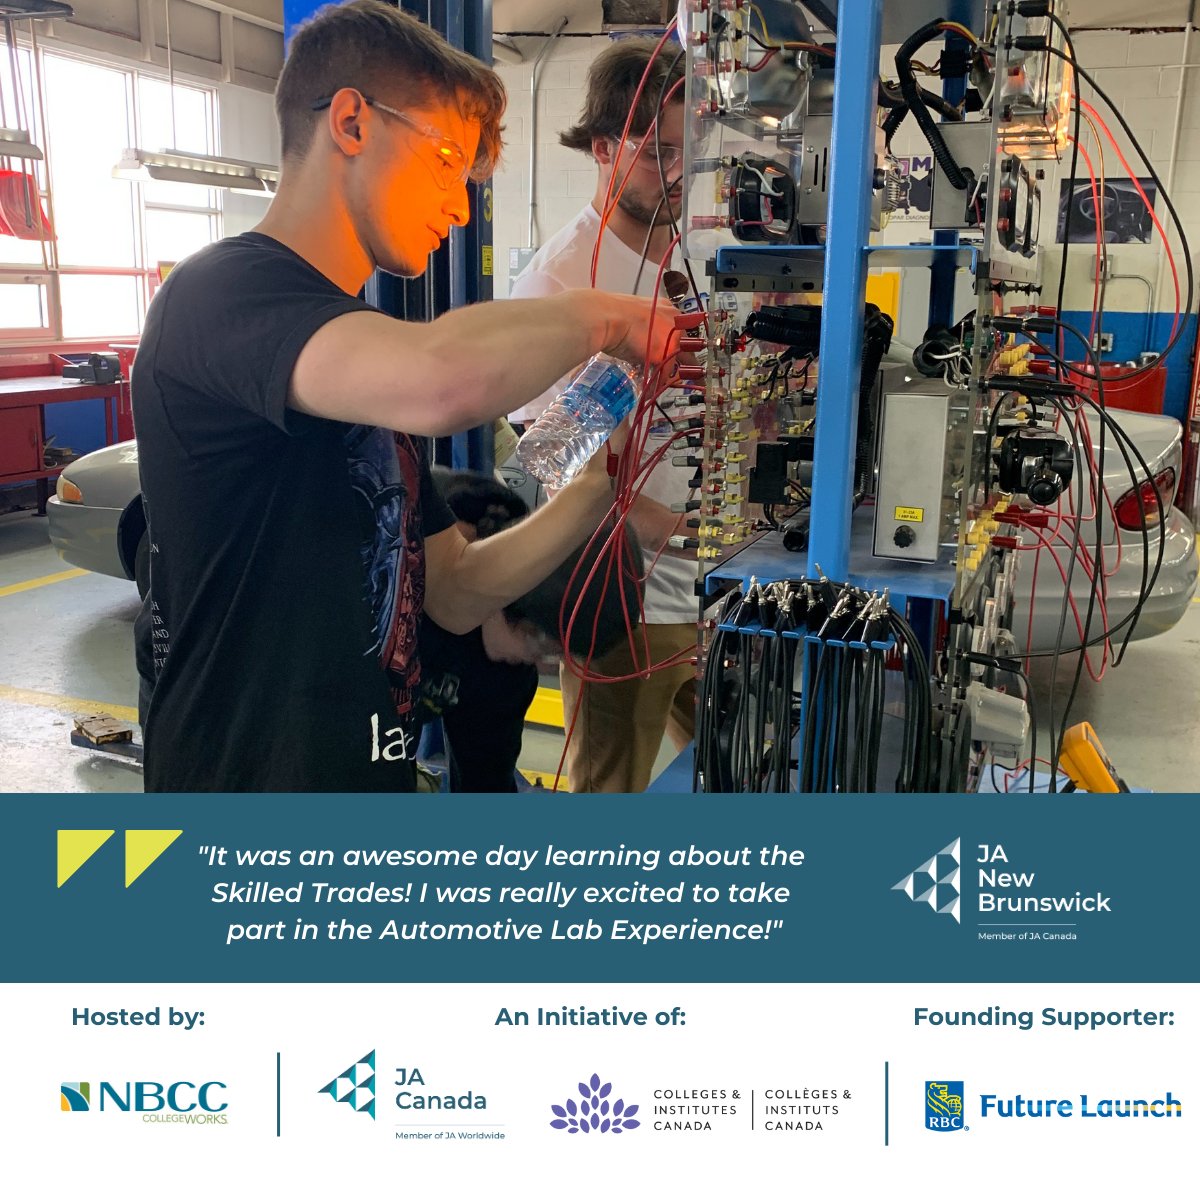 Students from Riverview took part in the “JANB World of Choices Skilled Trades Summit” at @myNBCC! Students had hands-on experiences and learned about the programs and careers available to them! Thank you to NBCC, @rbc & @collegecan for your support!

#rbcfuturelaunch @ja_canada